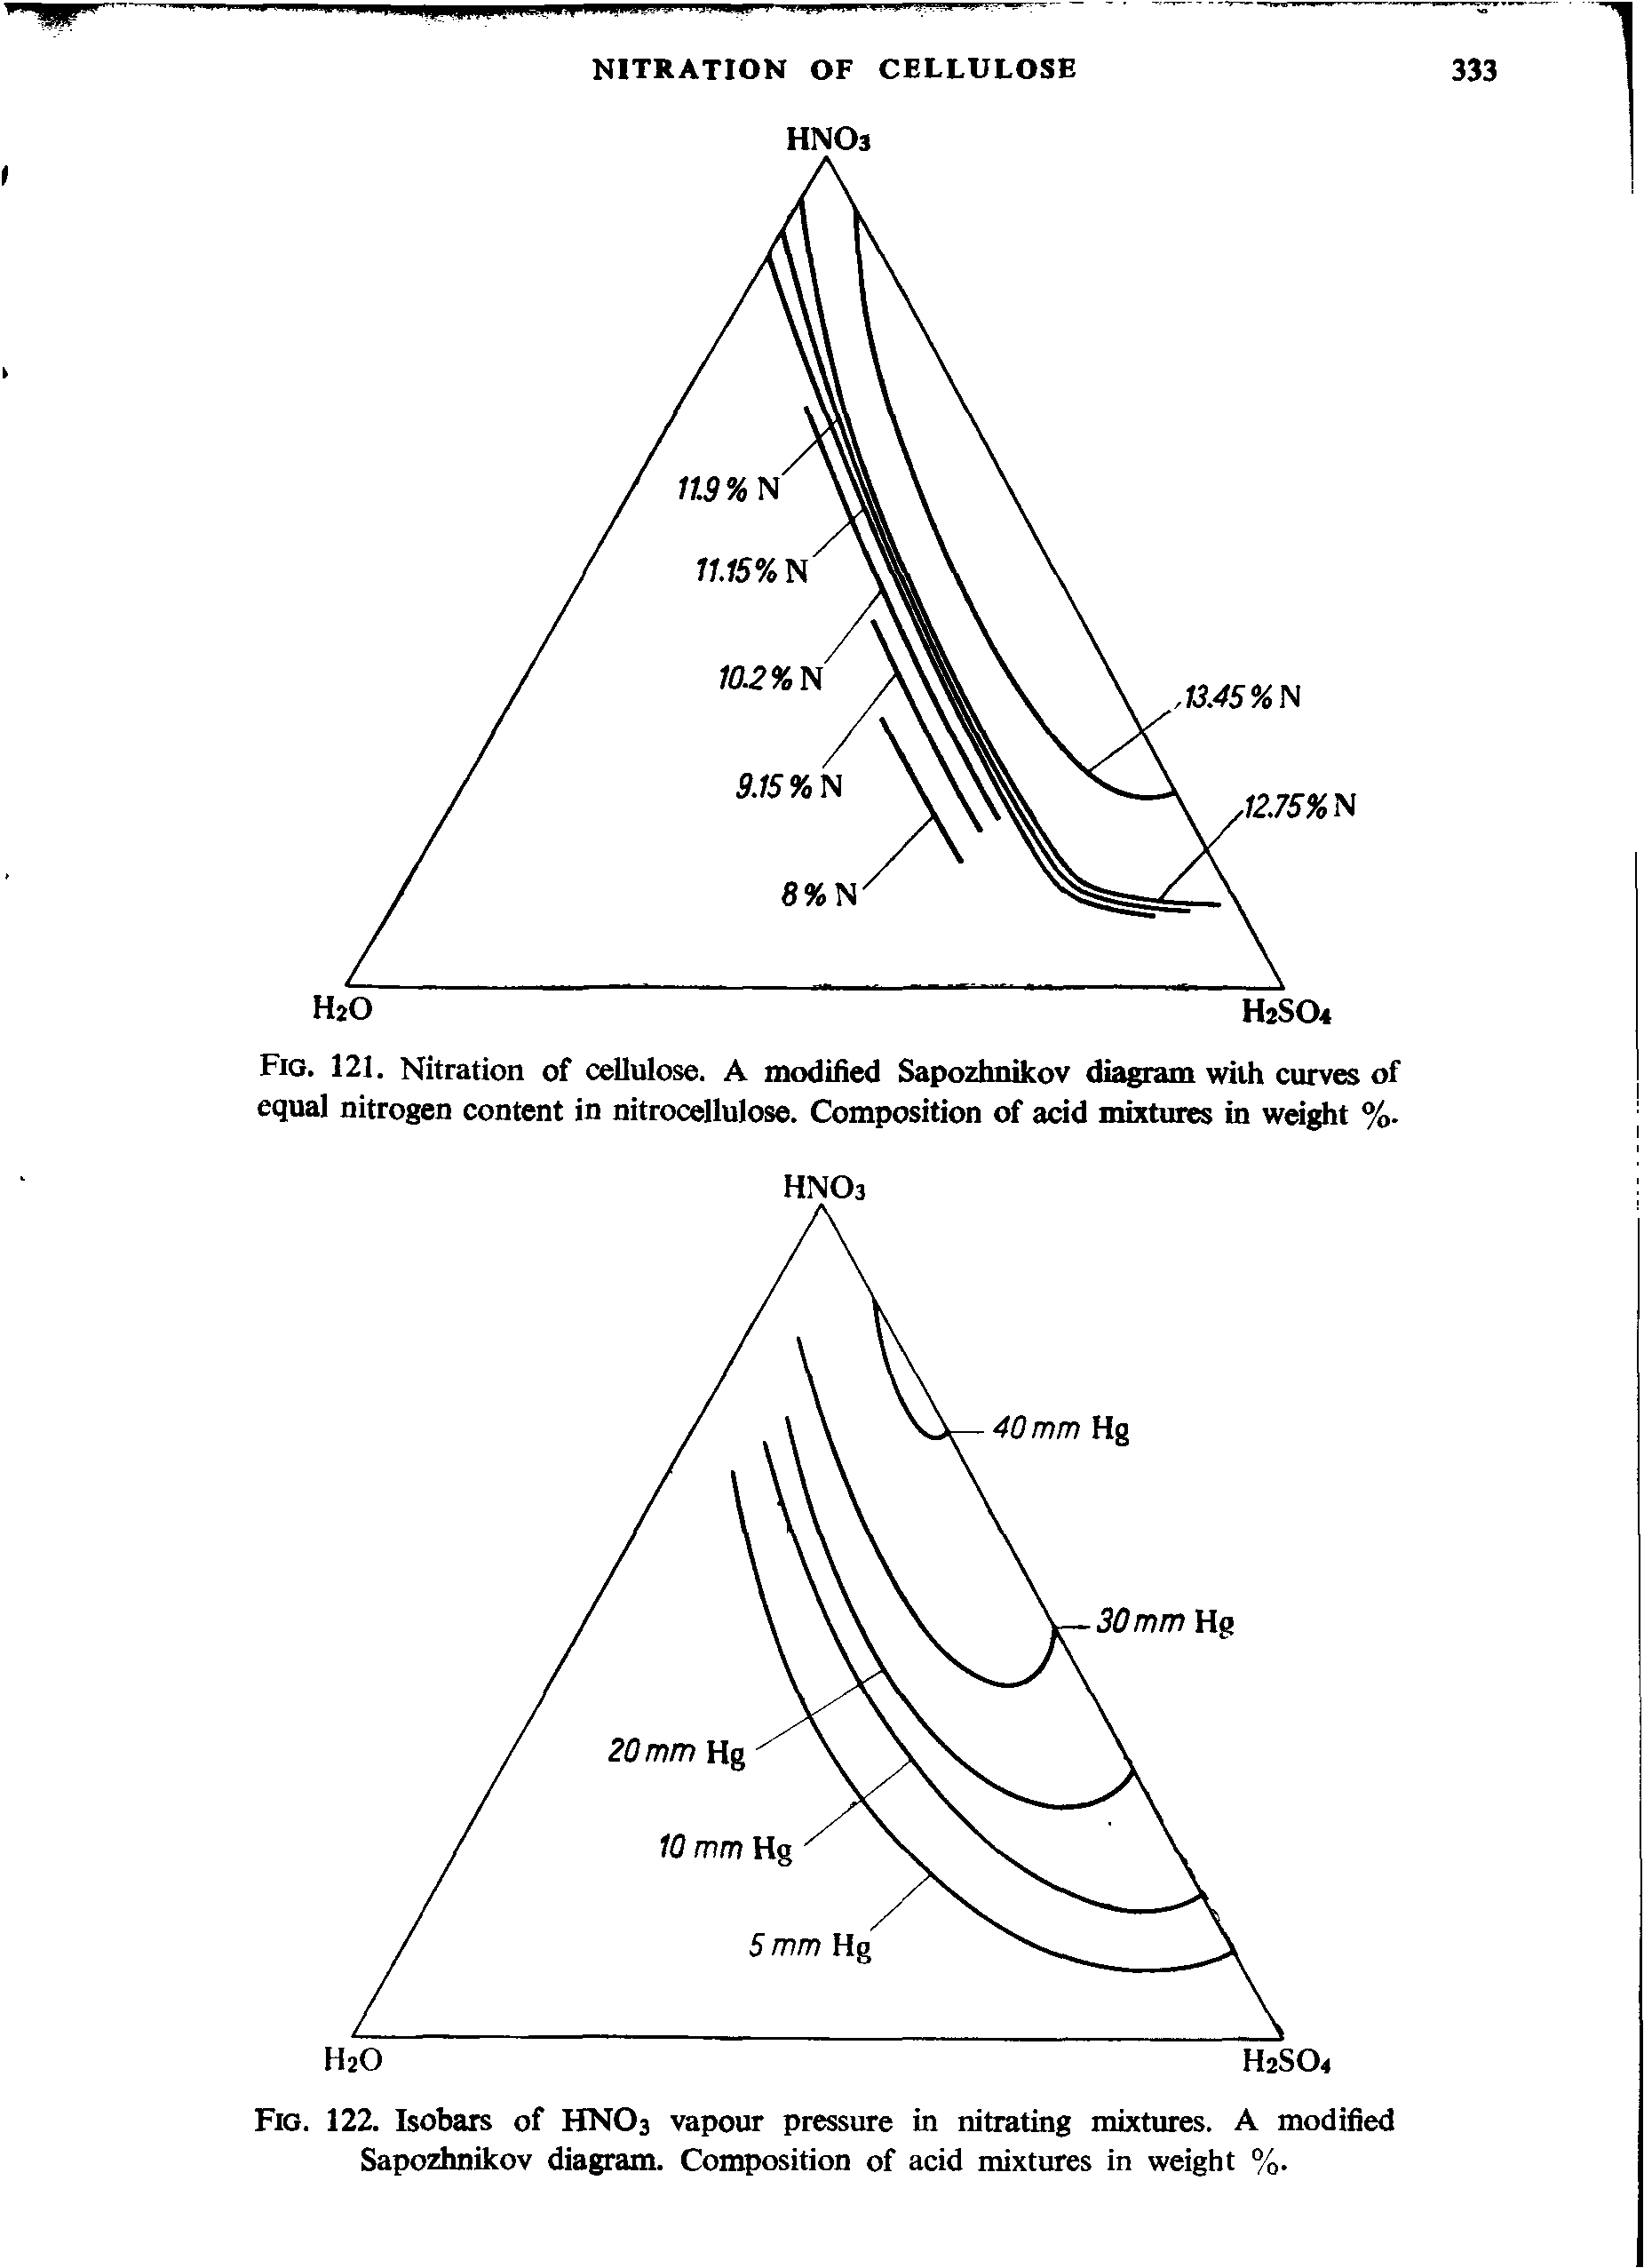 Fig. 121. Nitration of cellulose. A modified Sapozhnikov diagram with curves of equal nitrogen content in nitrocellulose. Composition of acid mixtures in weight %.